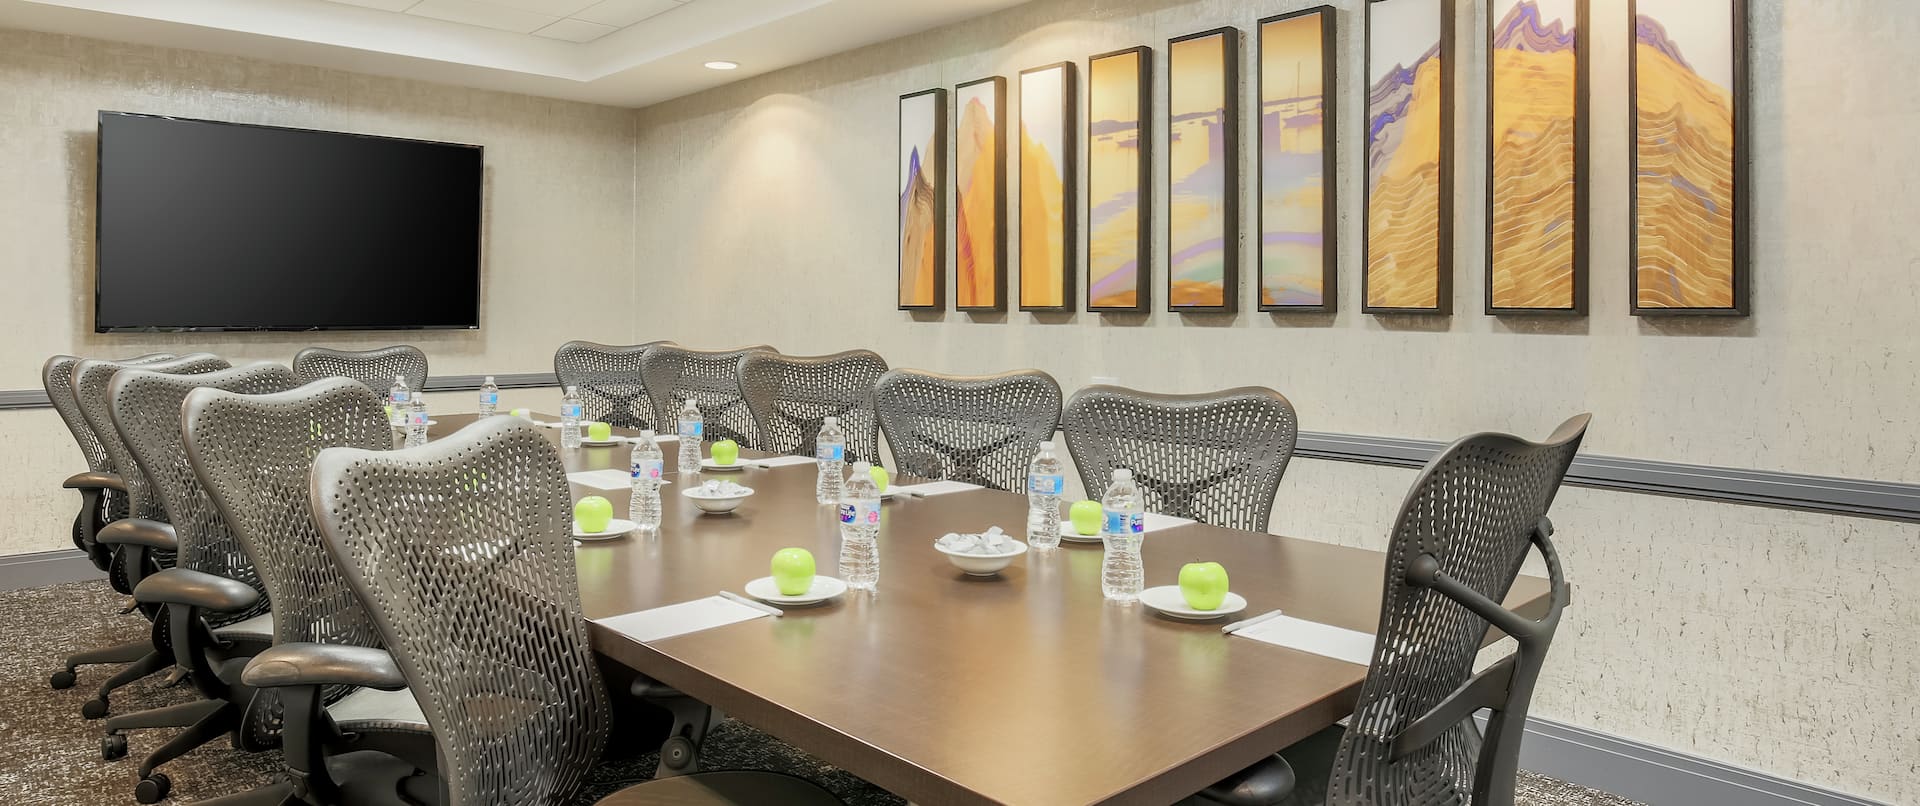 Boardroom with HDTV and Seating for 12 Guests